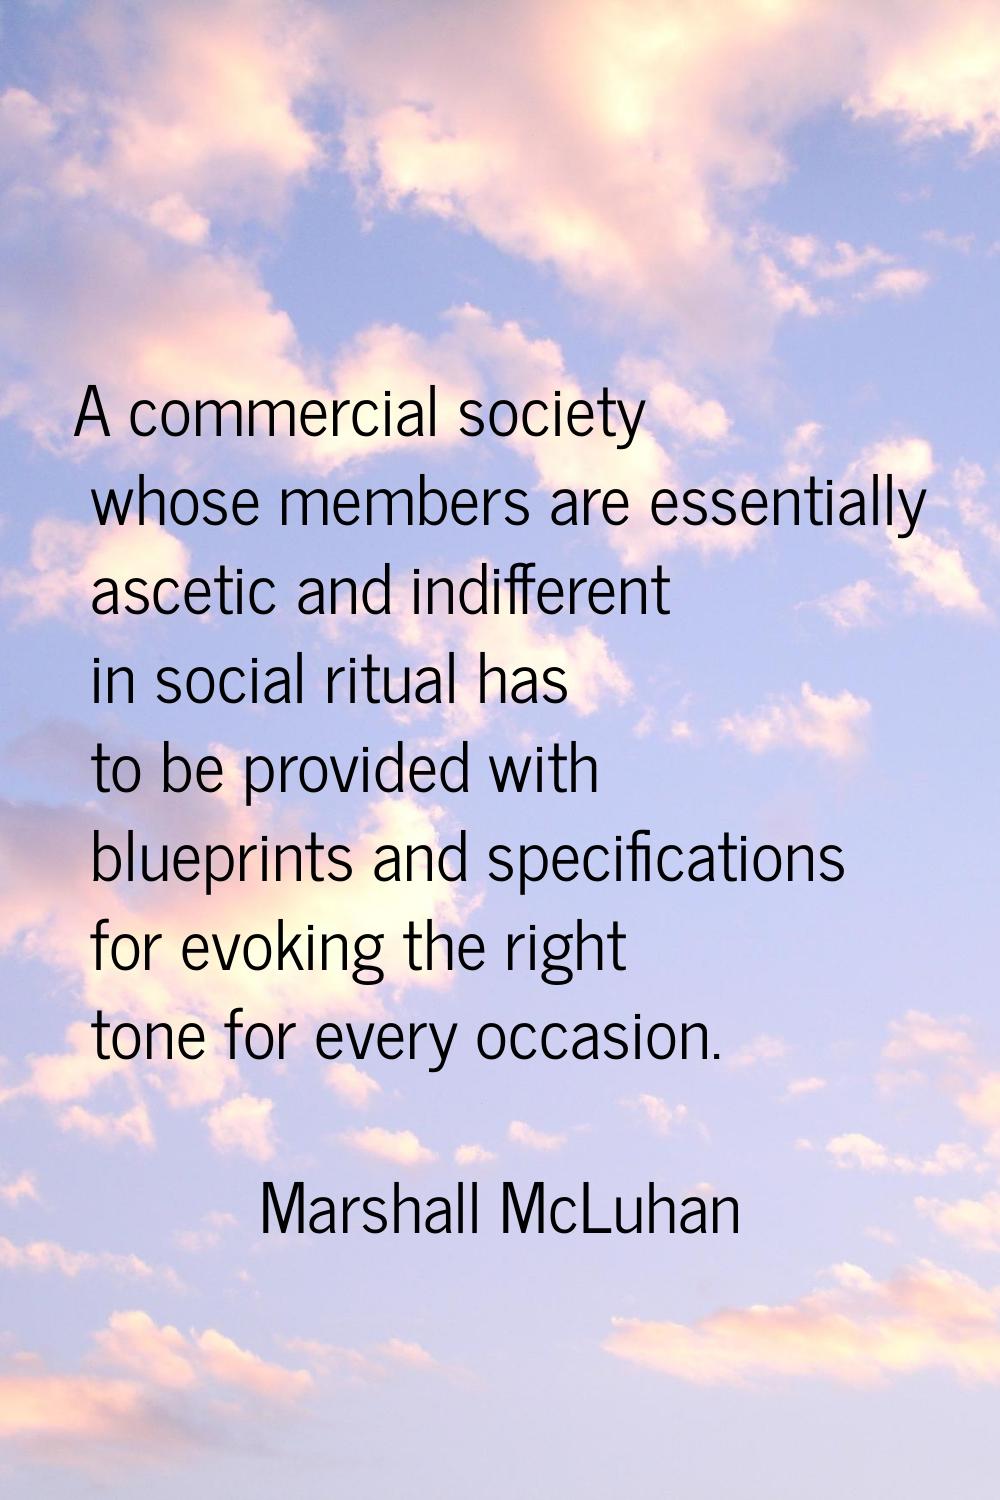 A commercial society whose members are essentially ascetic and indifferent in social ritual has to 